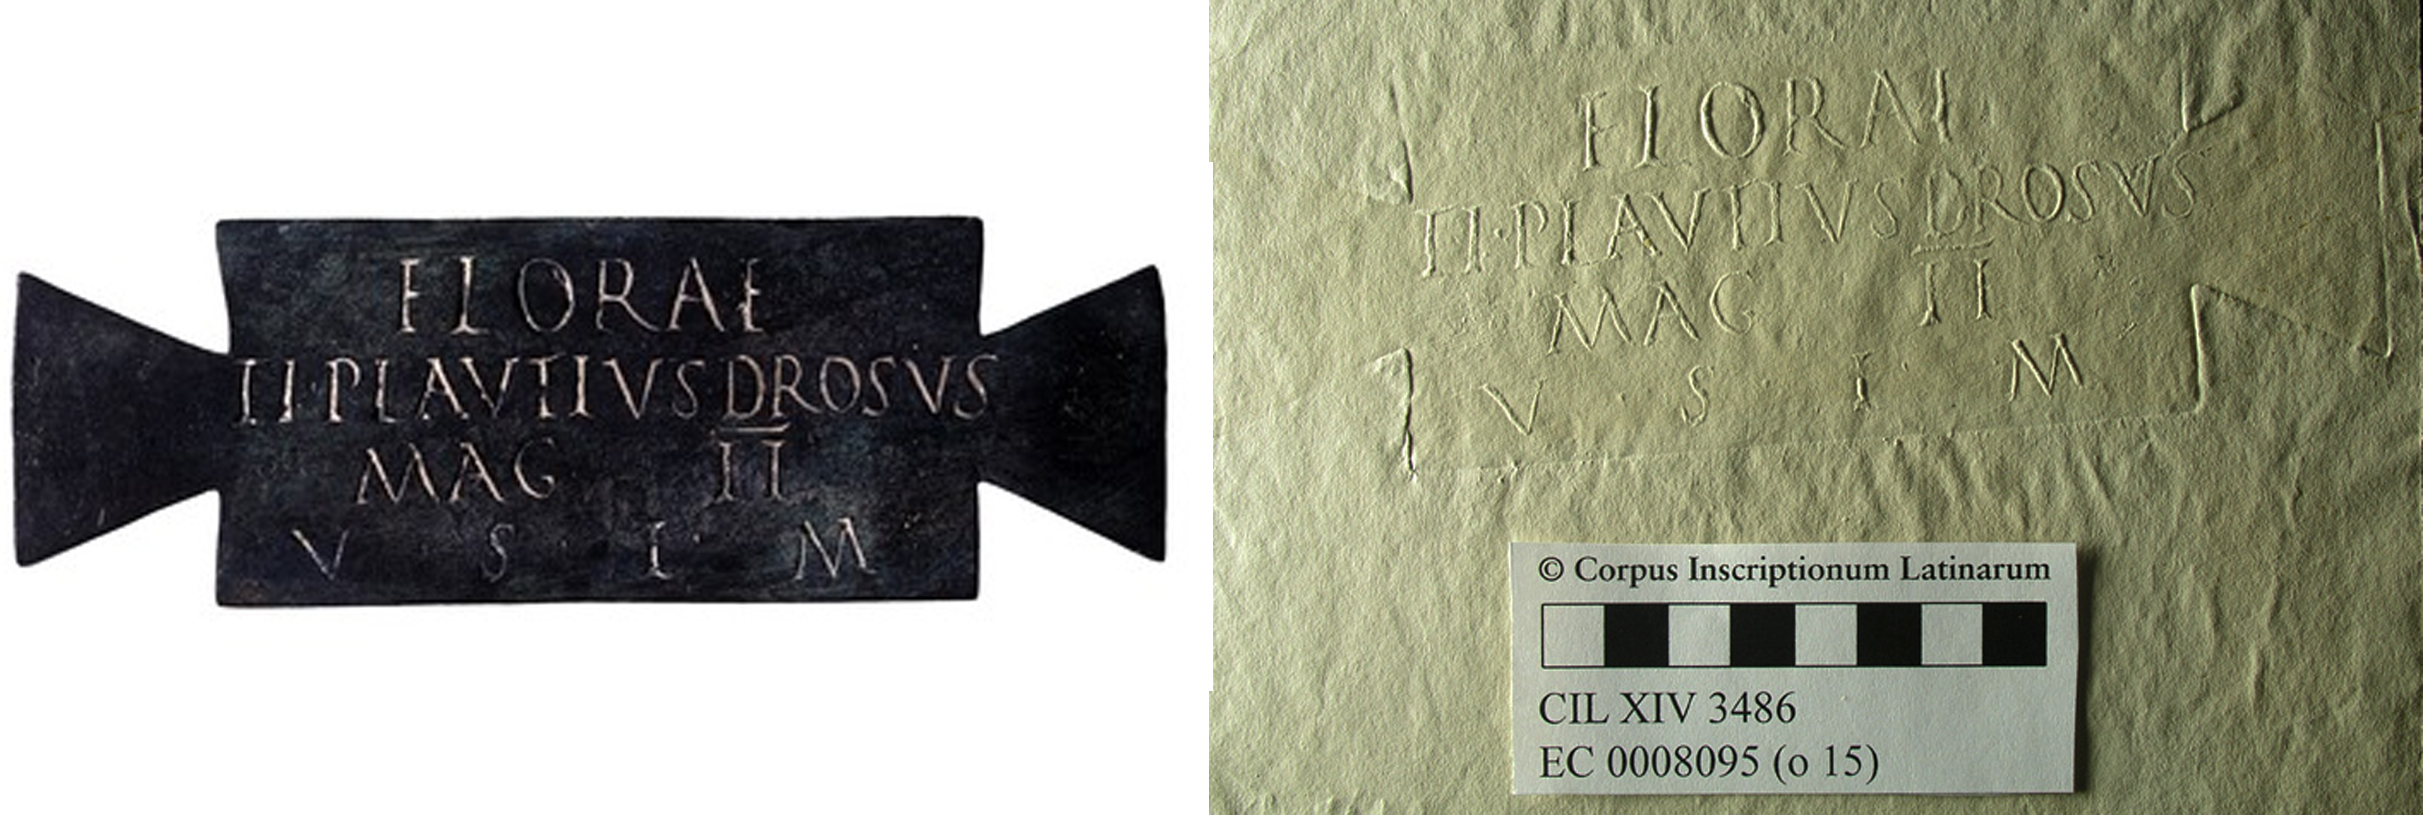 The Terme version of the Flora plaque (inv. 65029), and a ‘squeeze’ (paper impression) of the Naples version (inv. 2570)